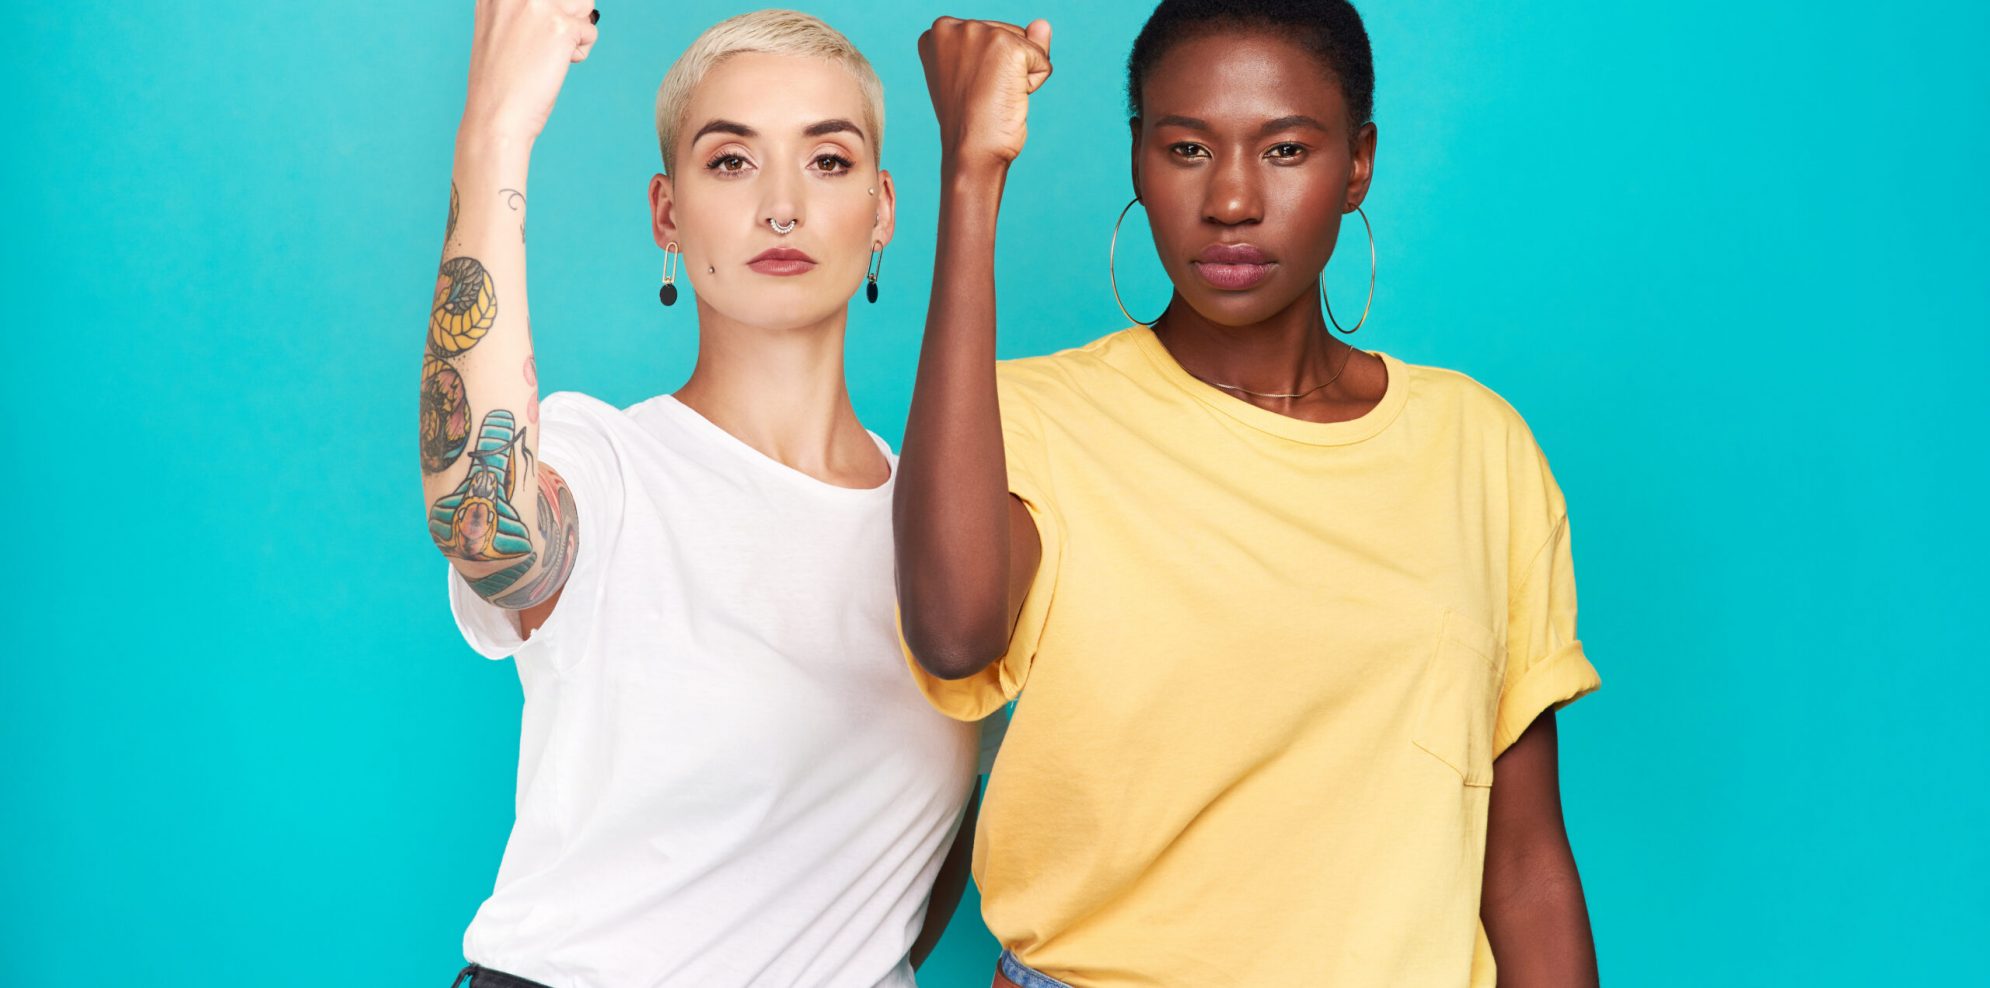 Studio shot of two young women raising their fists in solidarity against a turquoise background